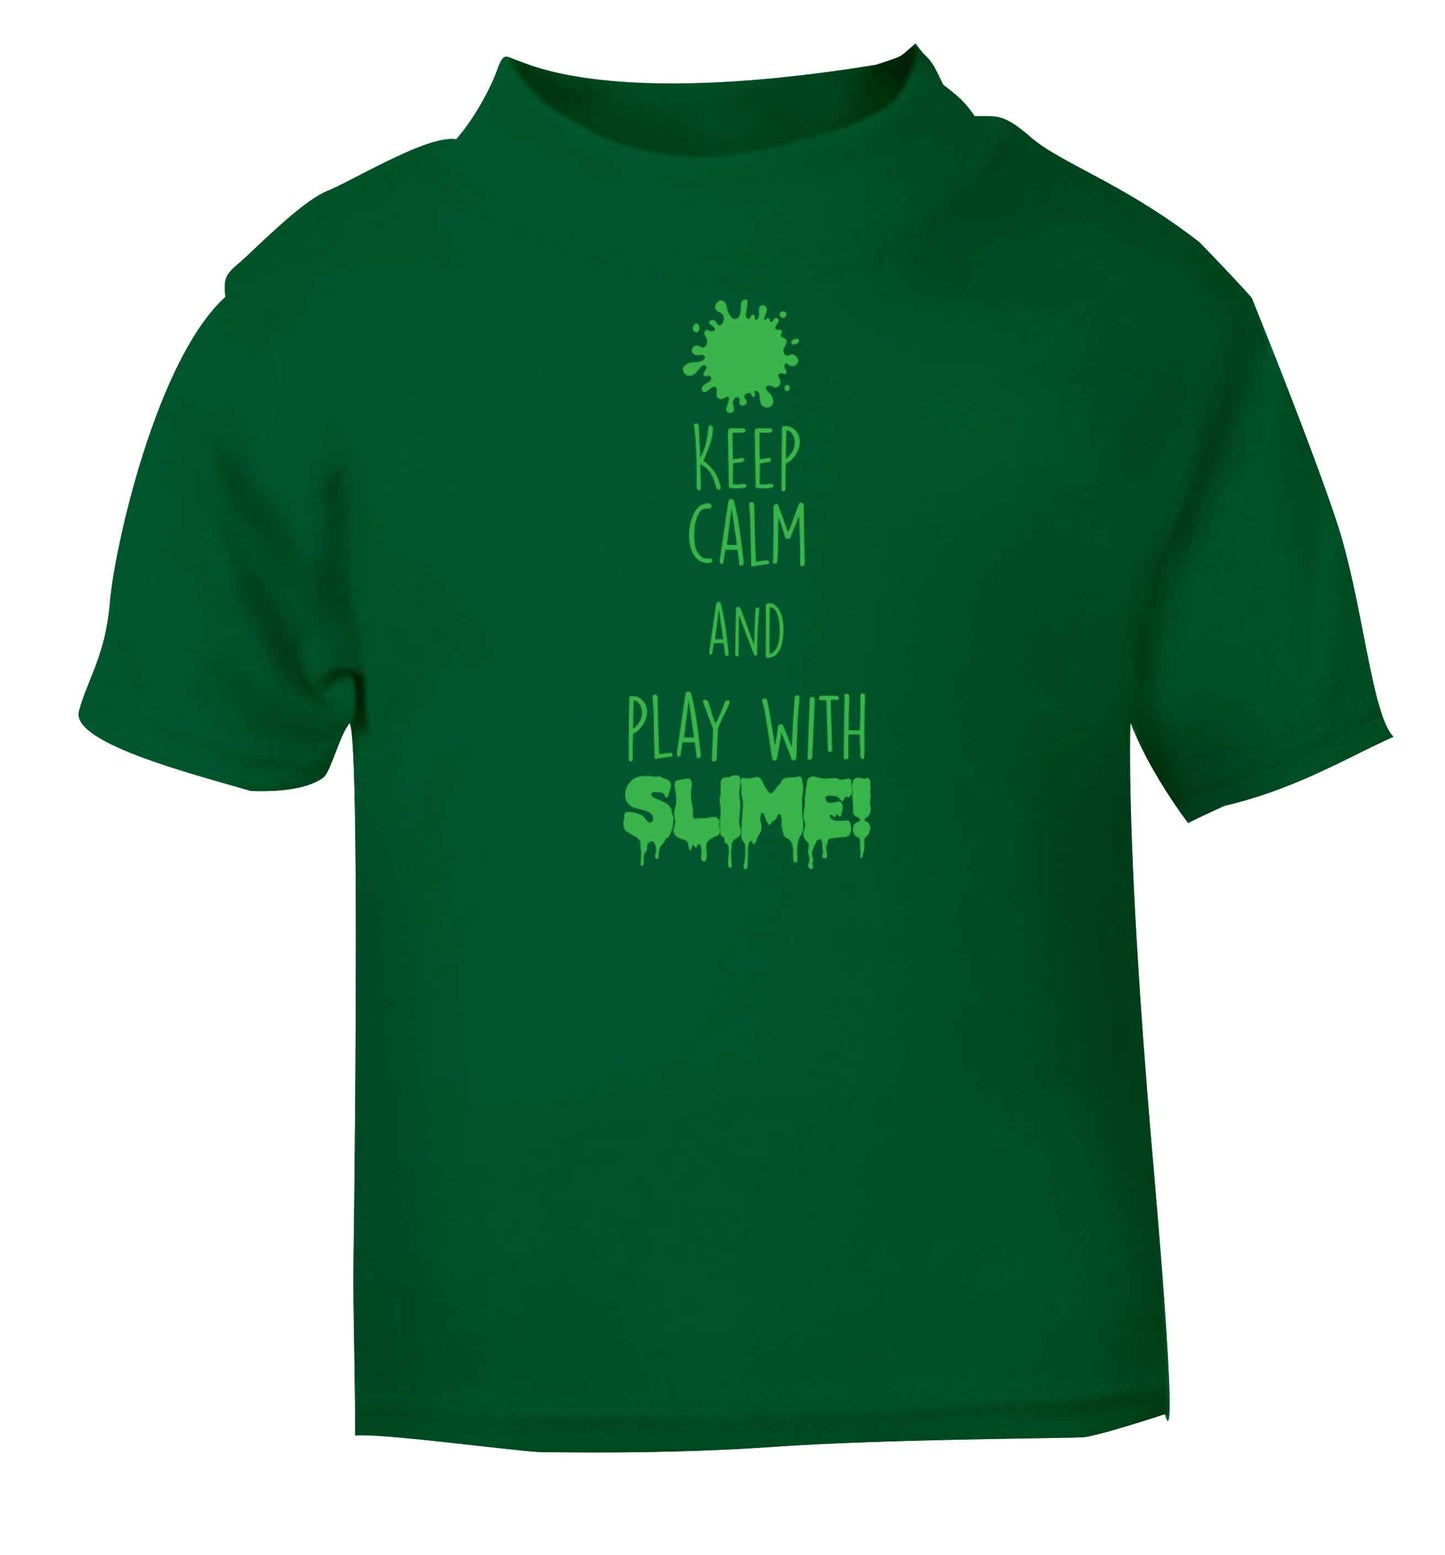 Neon green keep calm and play with slime!green baby toddler Tshirt 2 Years